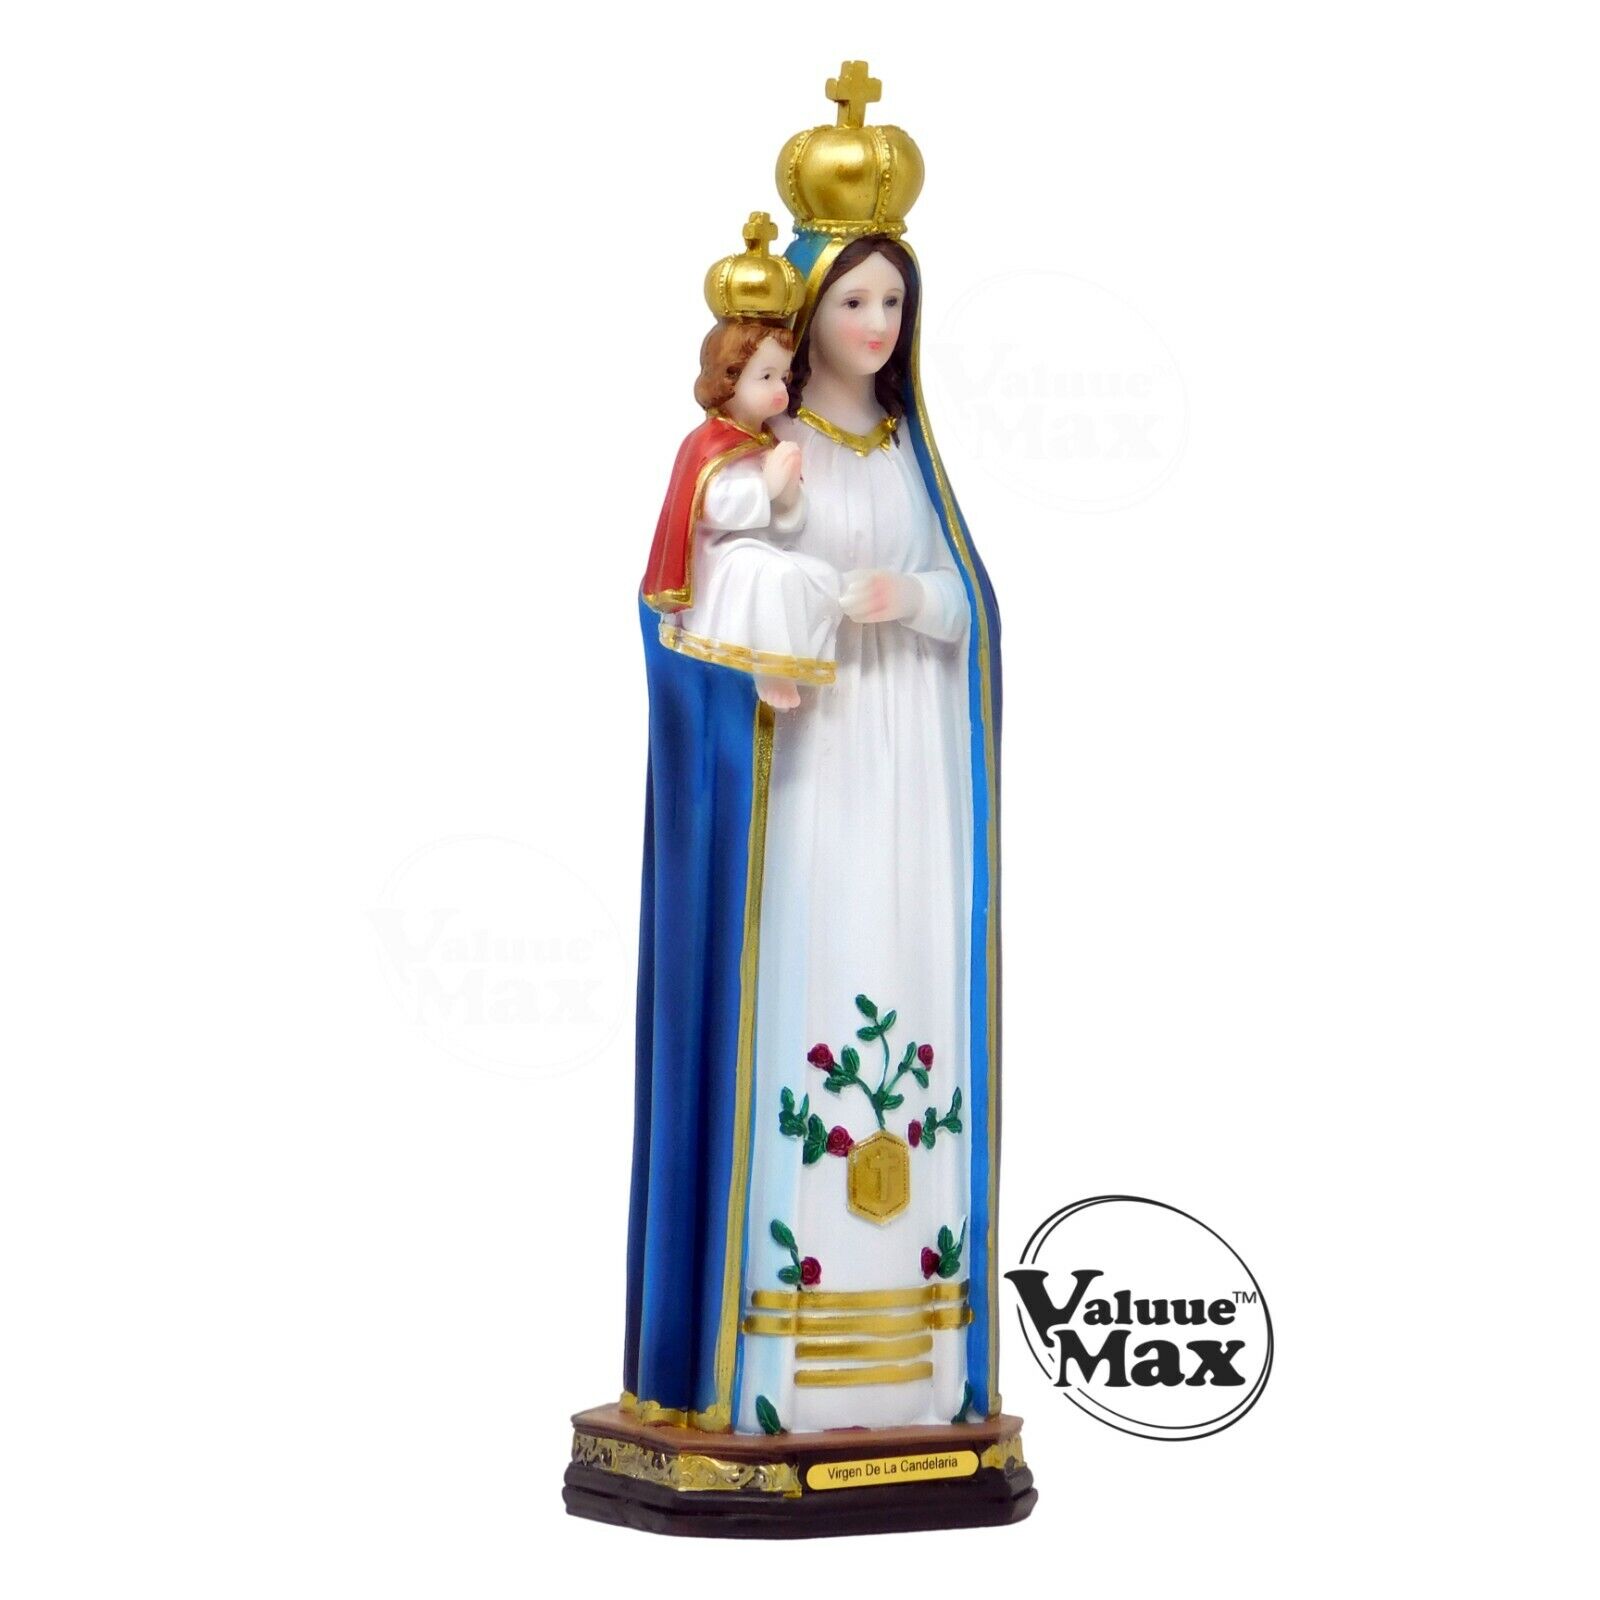 ValuueMax™ Our Lady of Candelaria Statue, Finely Detailed Resin, 12 Inch Tall  